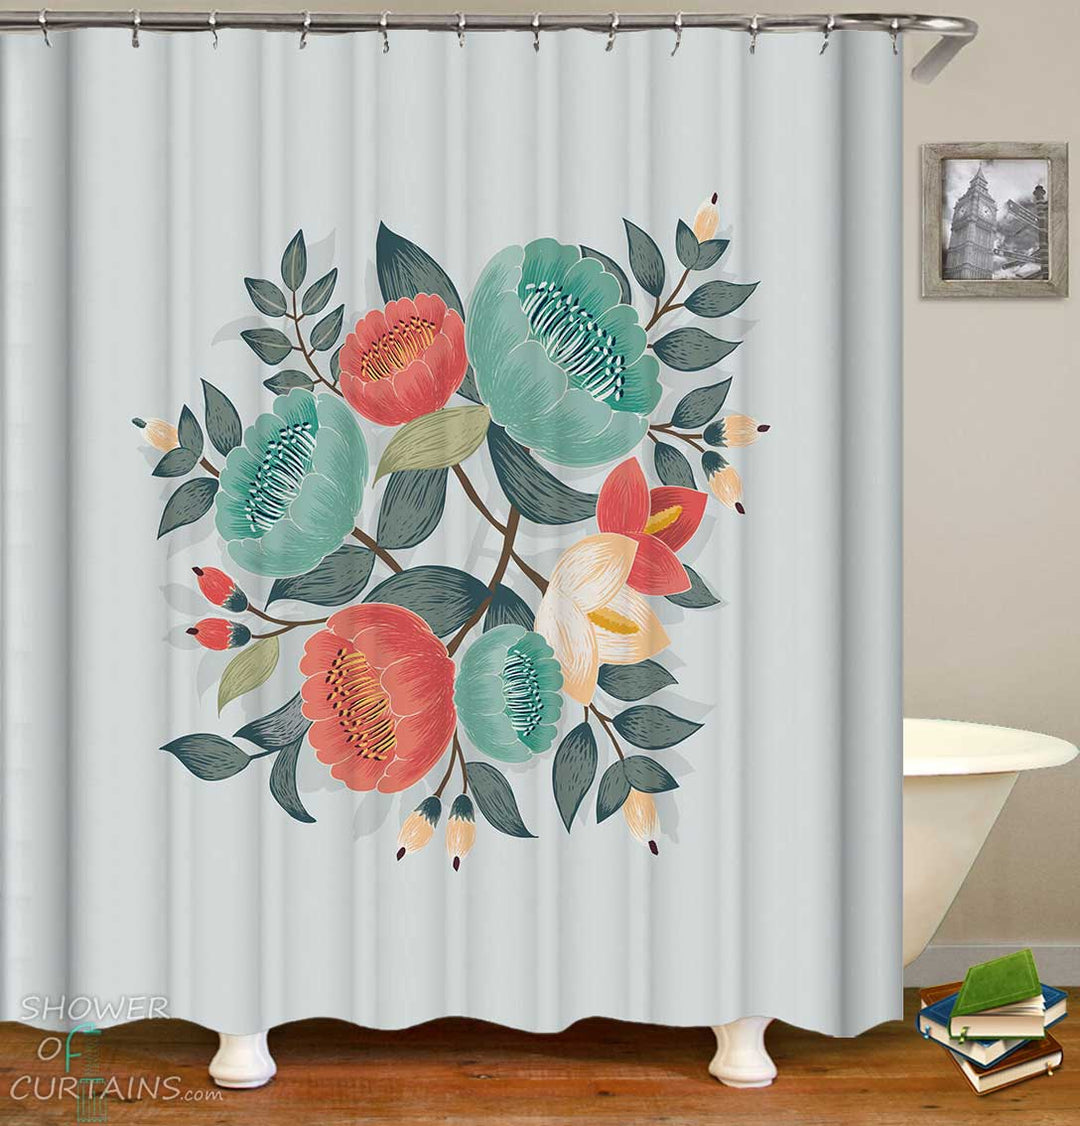 Shower Curtains with Simple Flowers Decor